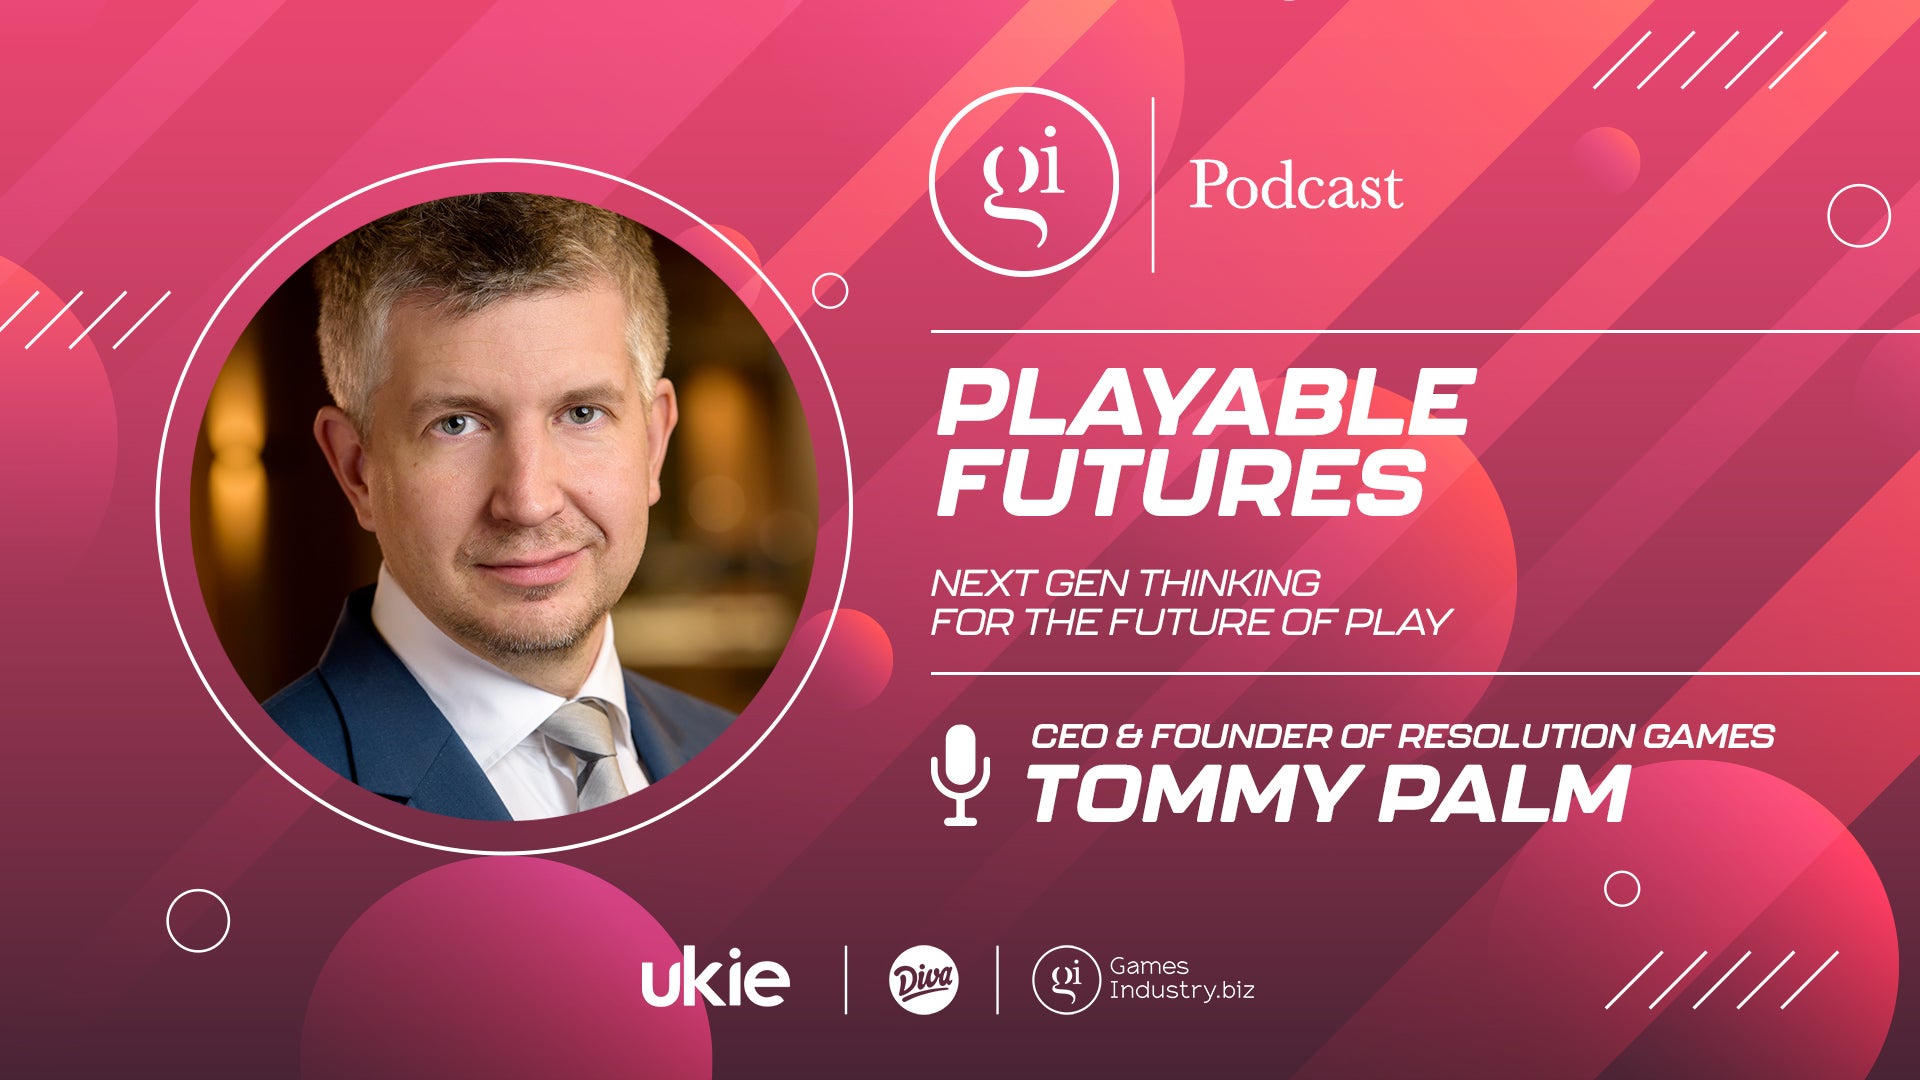 Image for The future of VR, with Resolution's Tommy Palm | Playable Futures Podcast